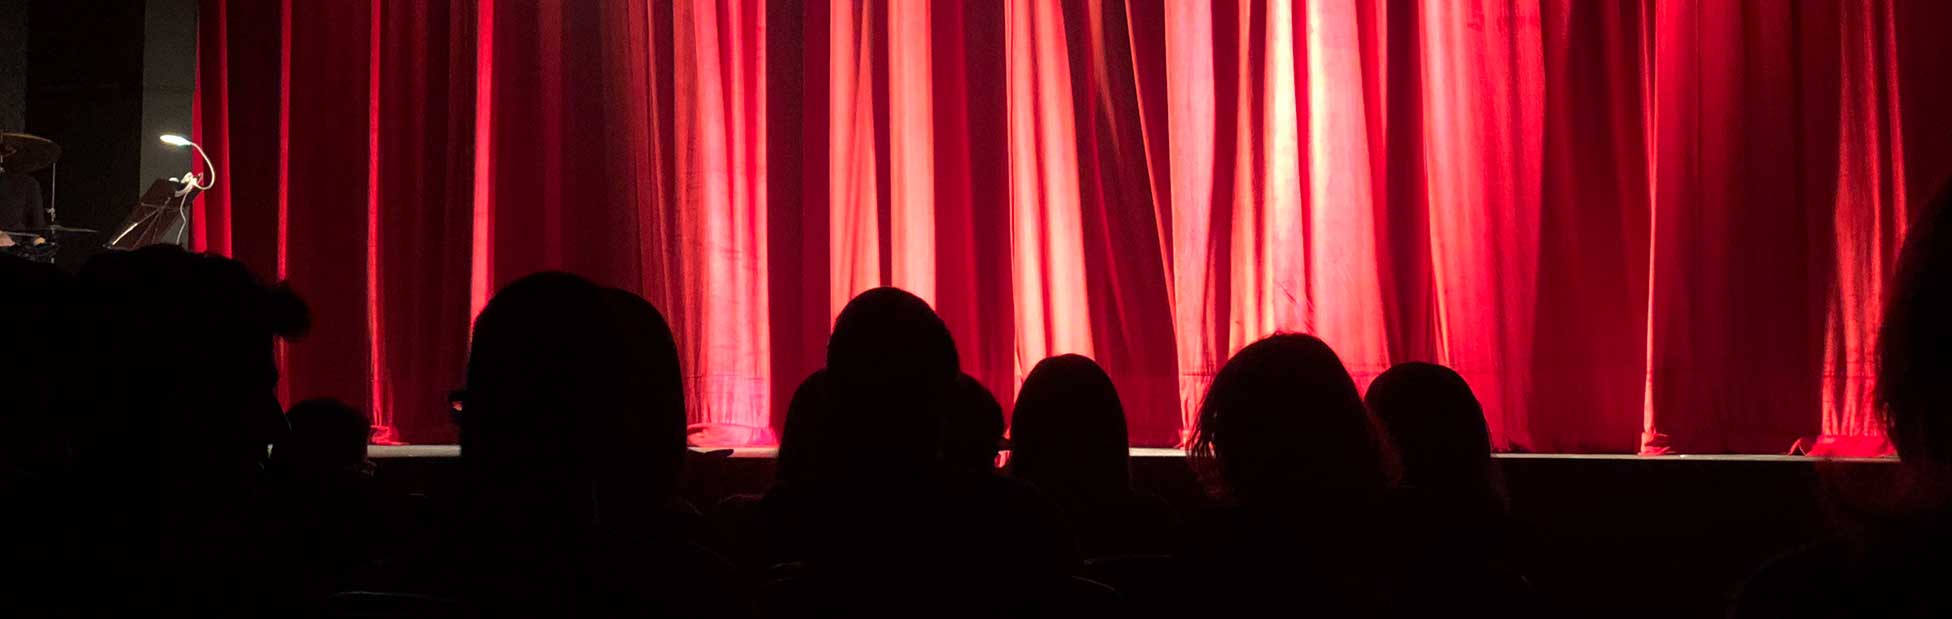 red curtain at theatre